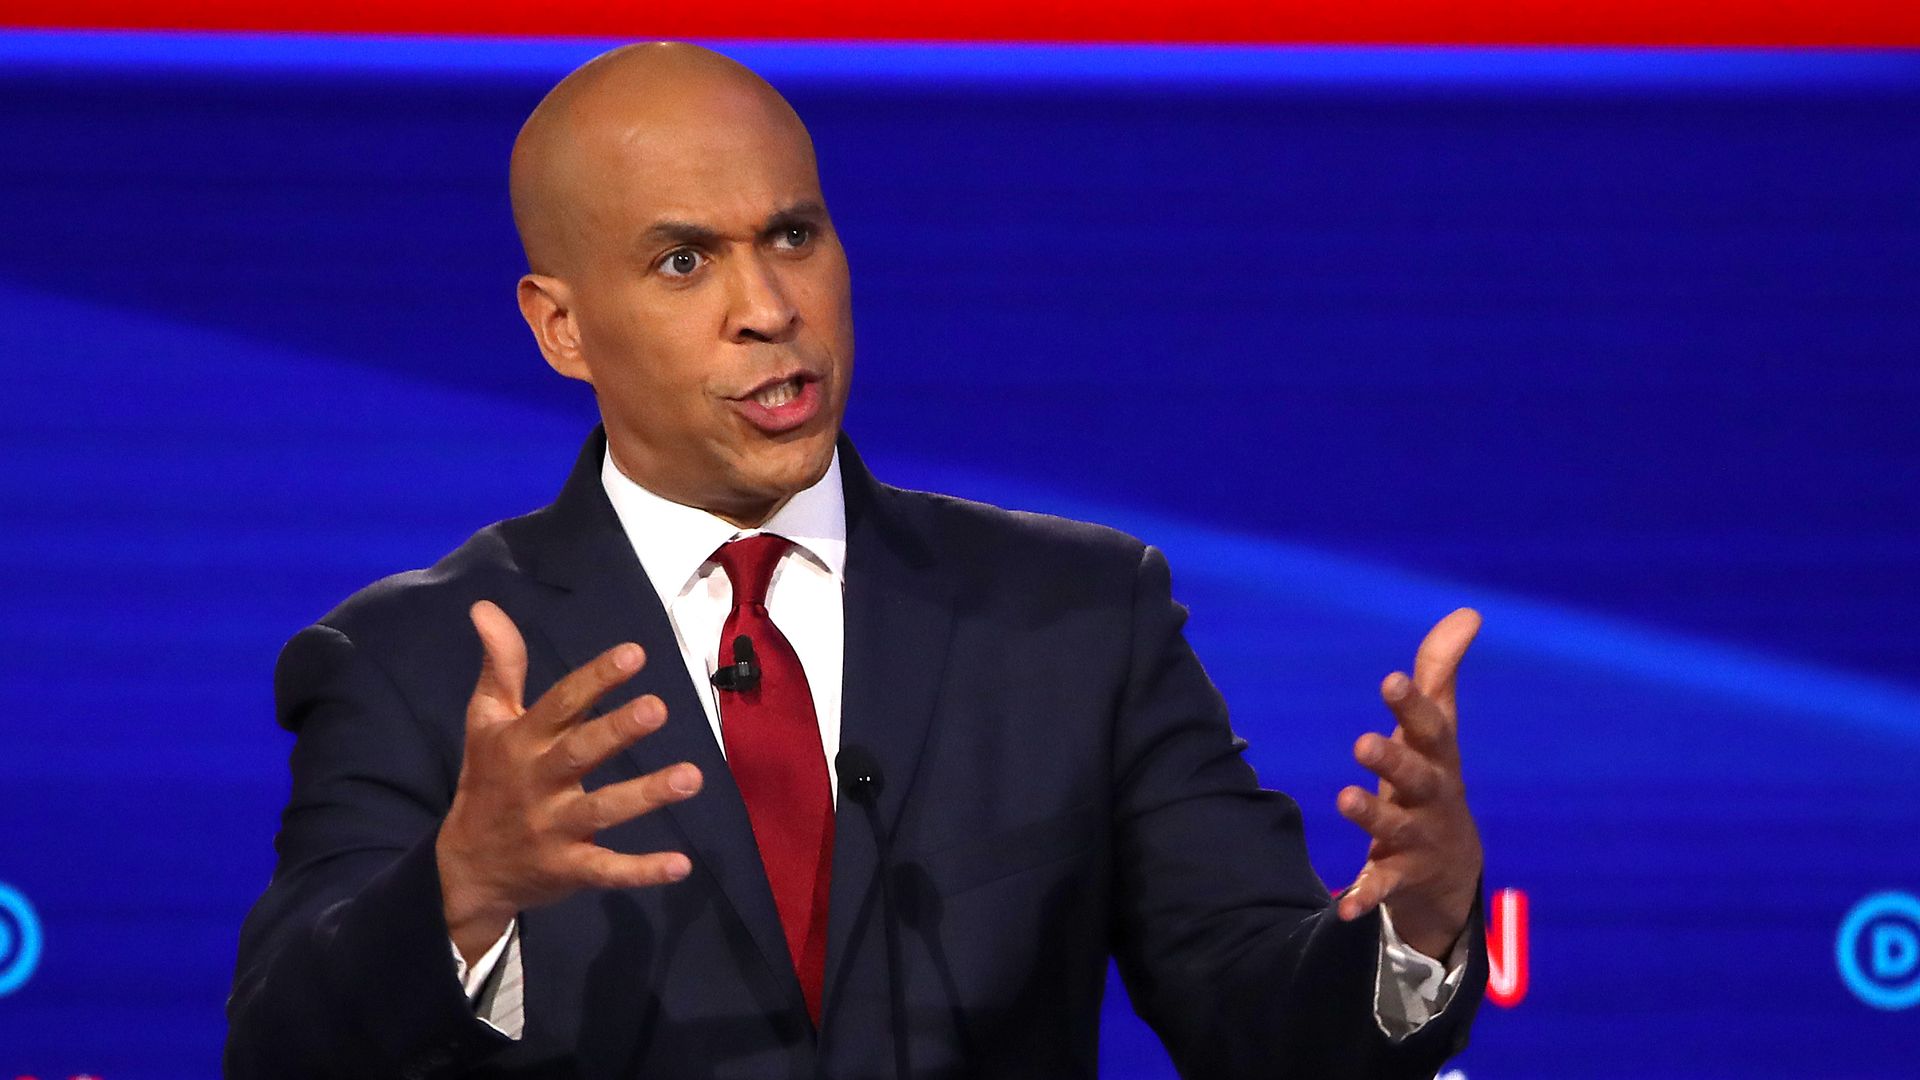 Sen. Cory Booker (D-NJ) speaks during the Democratic Presidential Debate at Otterbein University on October 15, 2019 in Westerville, Ohio.